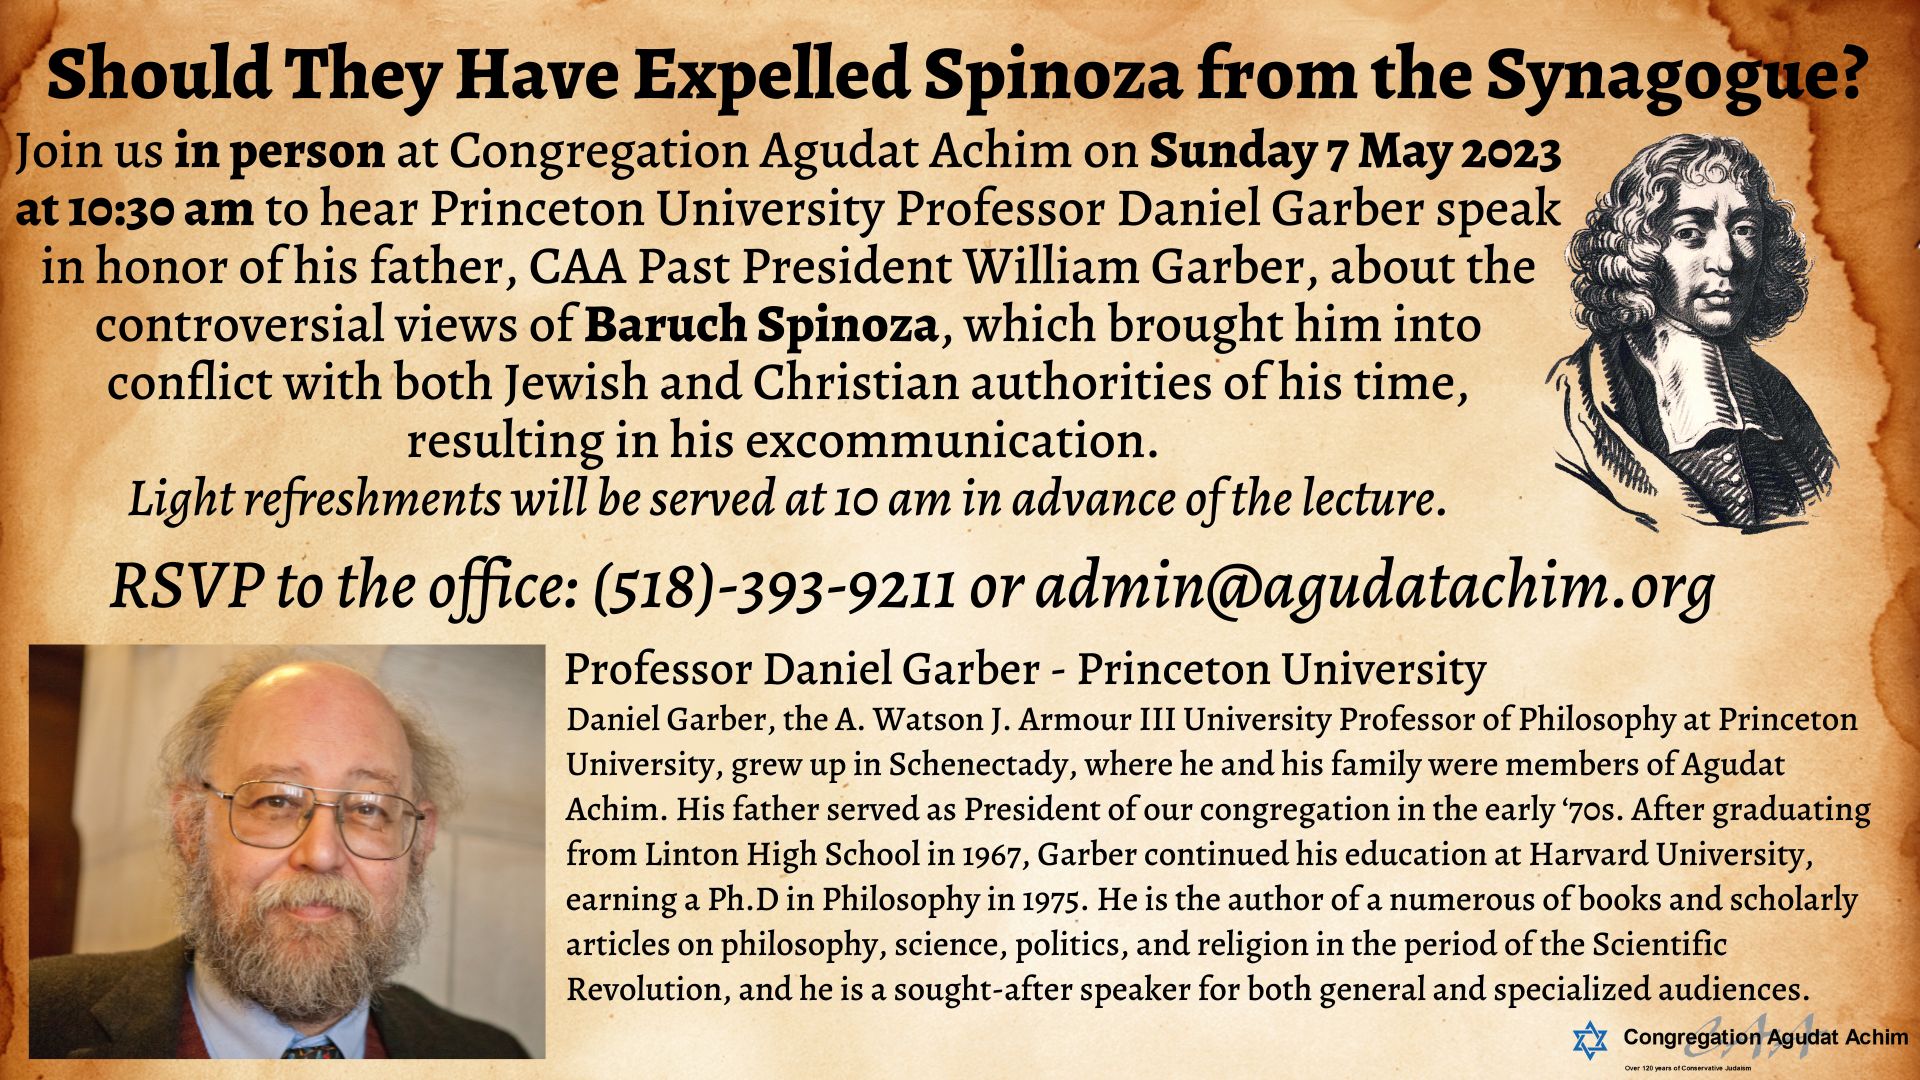 Should They Have Expelled Spinoza from the Synagogue?